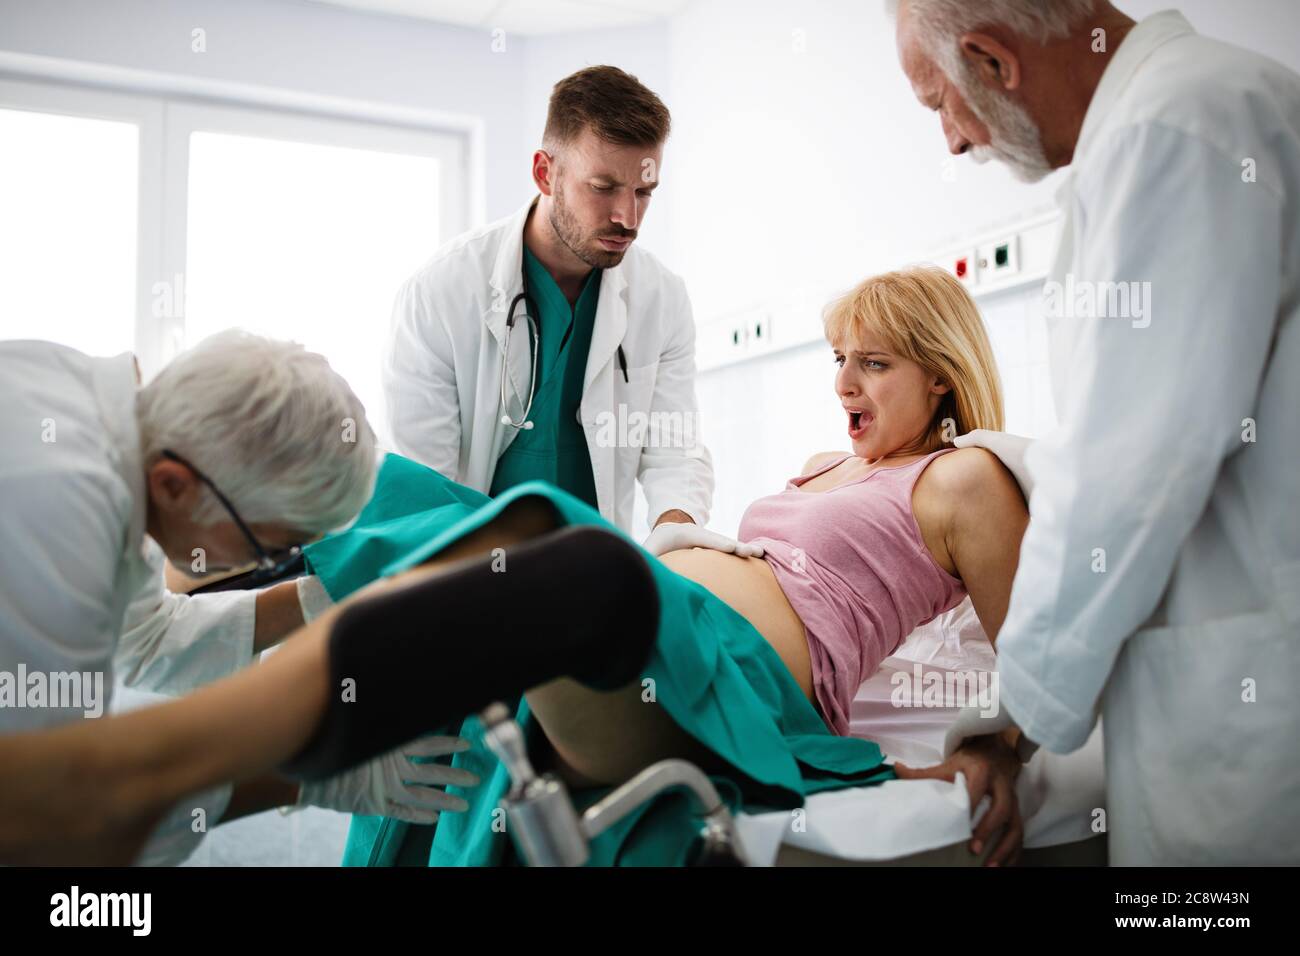 In the hospital woman in labor pushes to give birth, obstetricians assisting Stock Photo